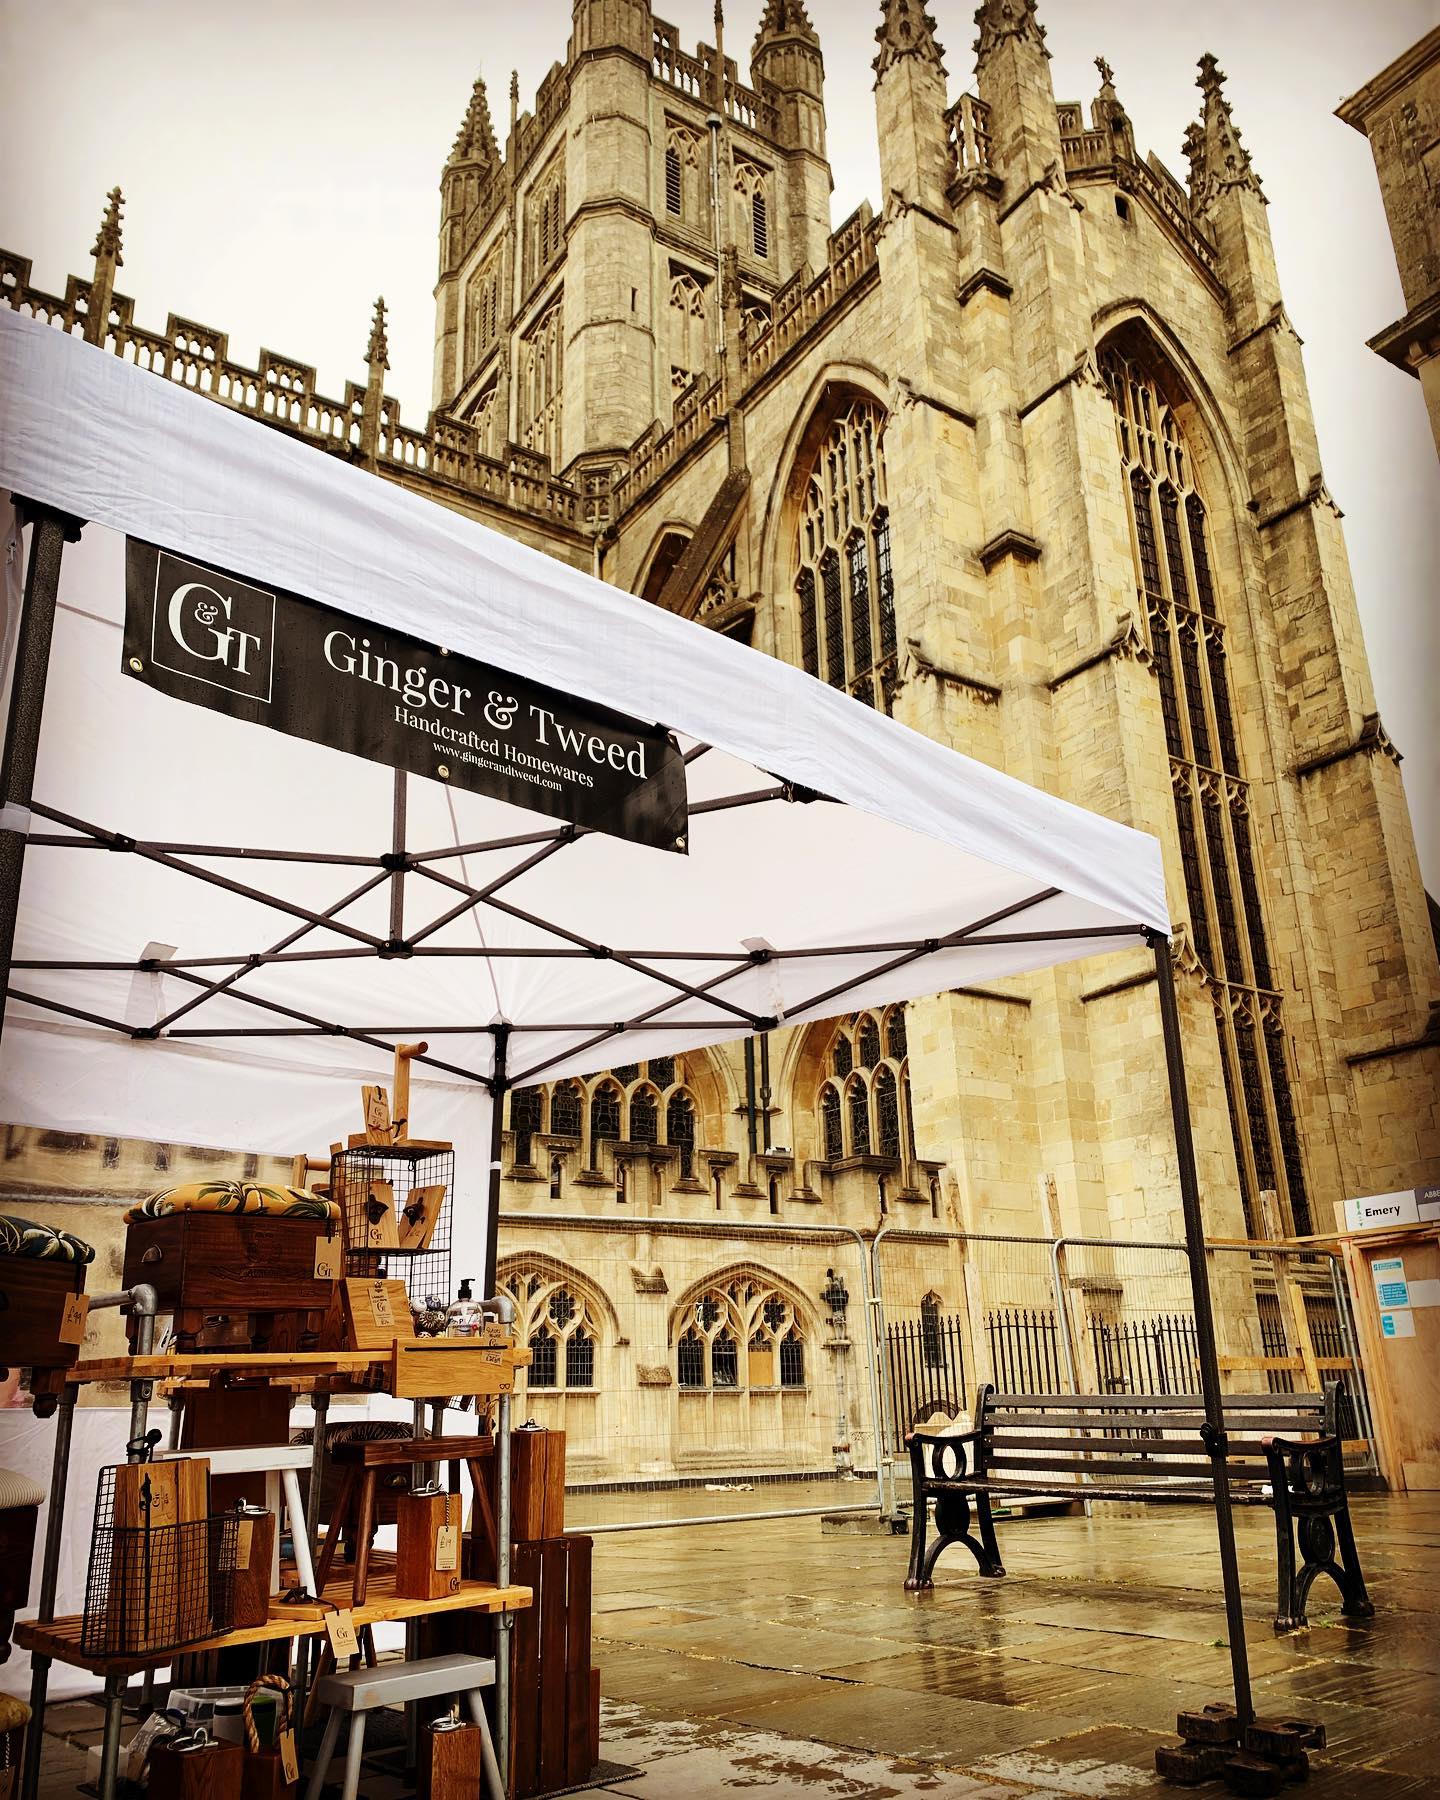 Looking forward to being back in the centre of Bath this coming weekend for two days of the @abbeyquartermarket find us next to #bathabbey #shoplocal #shopsmall #shophandmade #bathbid #bathshopping #halloween #weekendspecial #savethedate